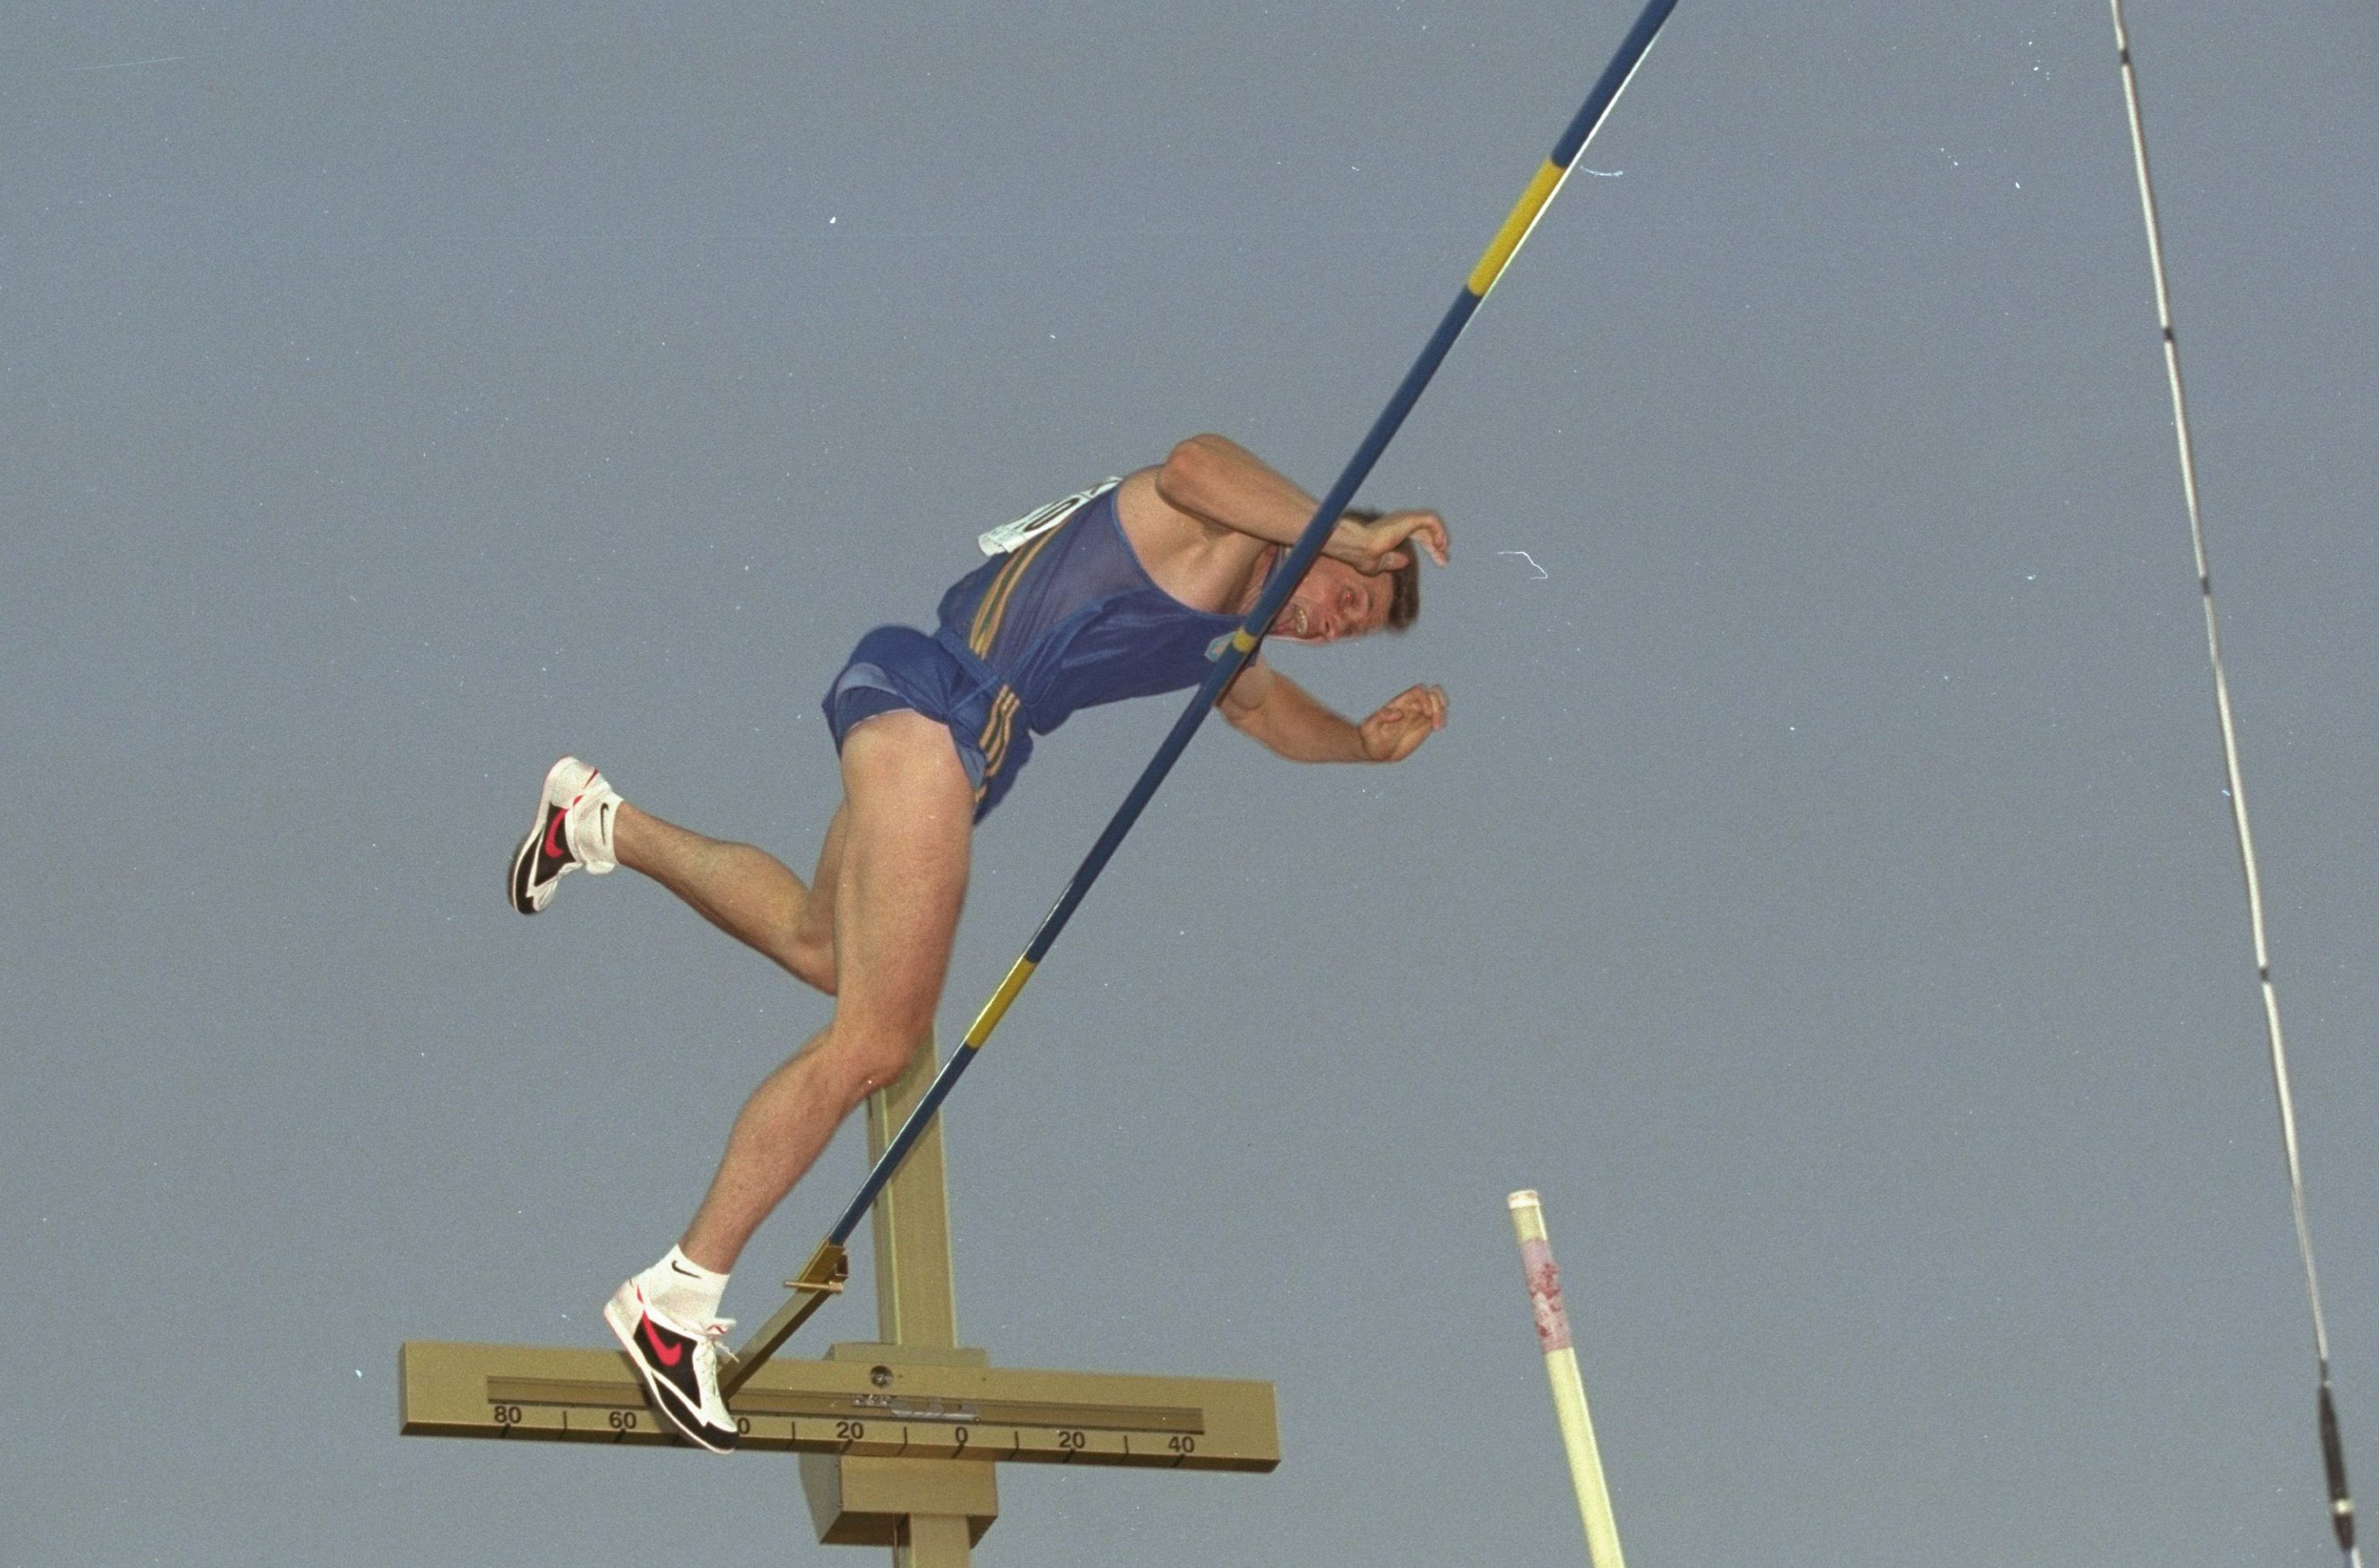 Sergey Bubka in action at the 1997 World Championships